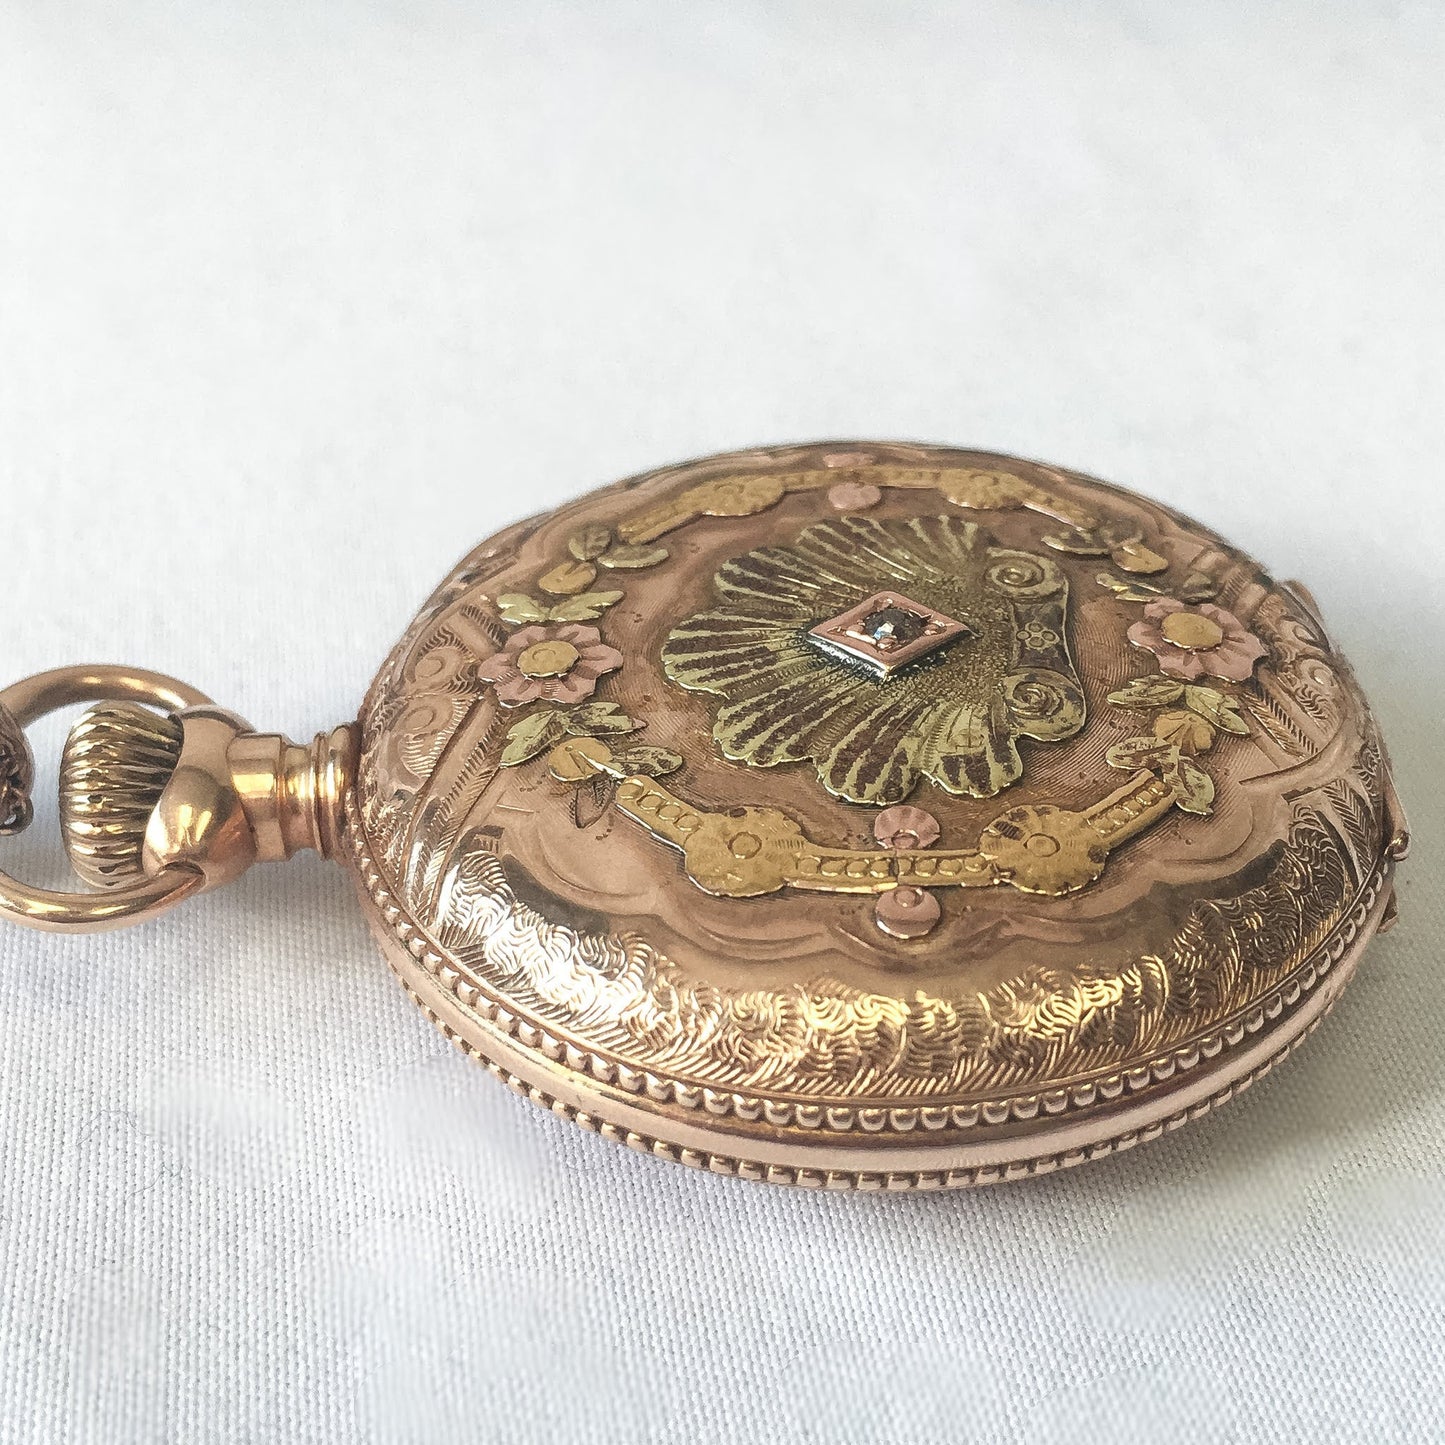 Antique 14k Hampden Gold Oceanic Floral Pocket Watch with Chain, Diamond and Gold Pocket Watch, 17 Jewel, WORKS!